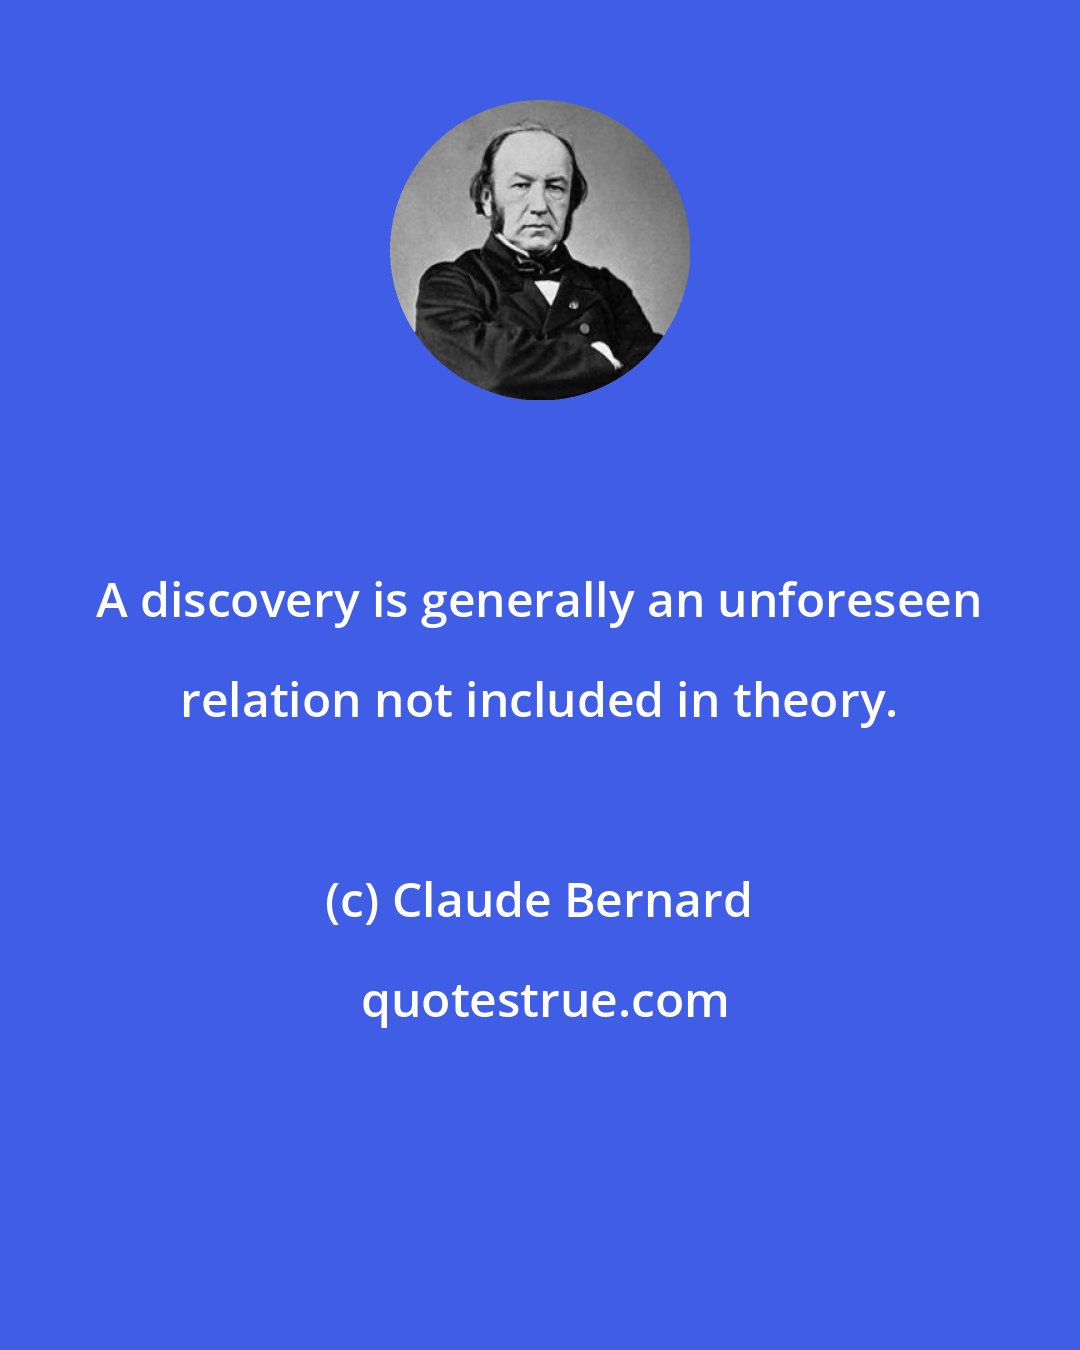 Claude Bernard: A discovery is generally an unforeseen relation not included in theory.